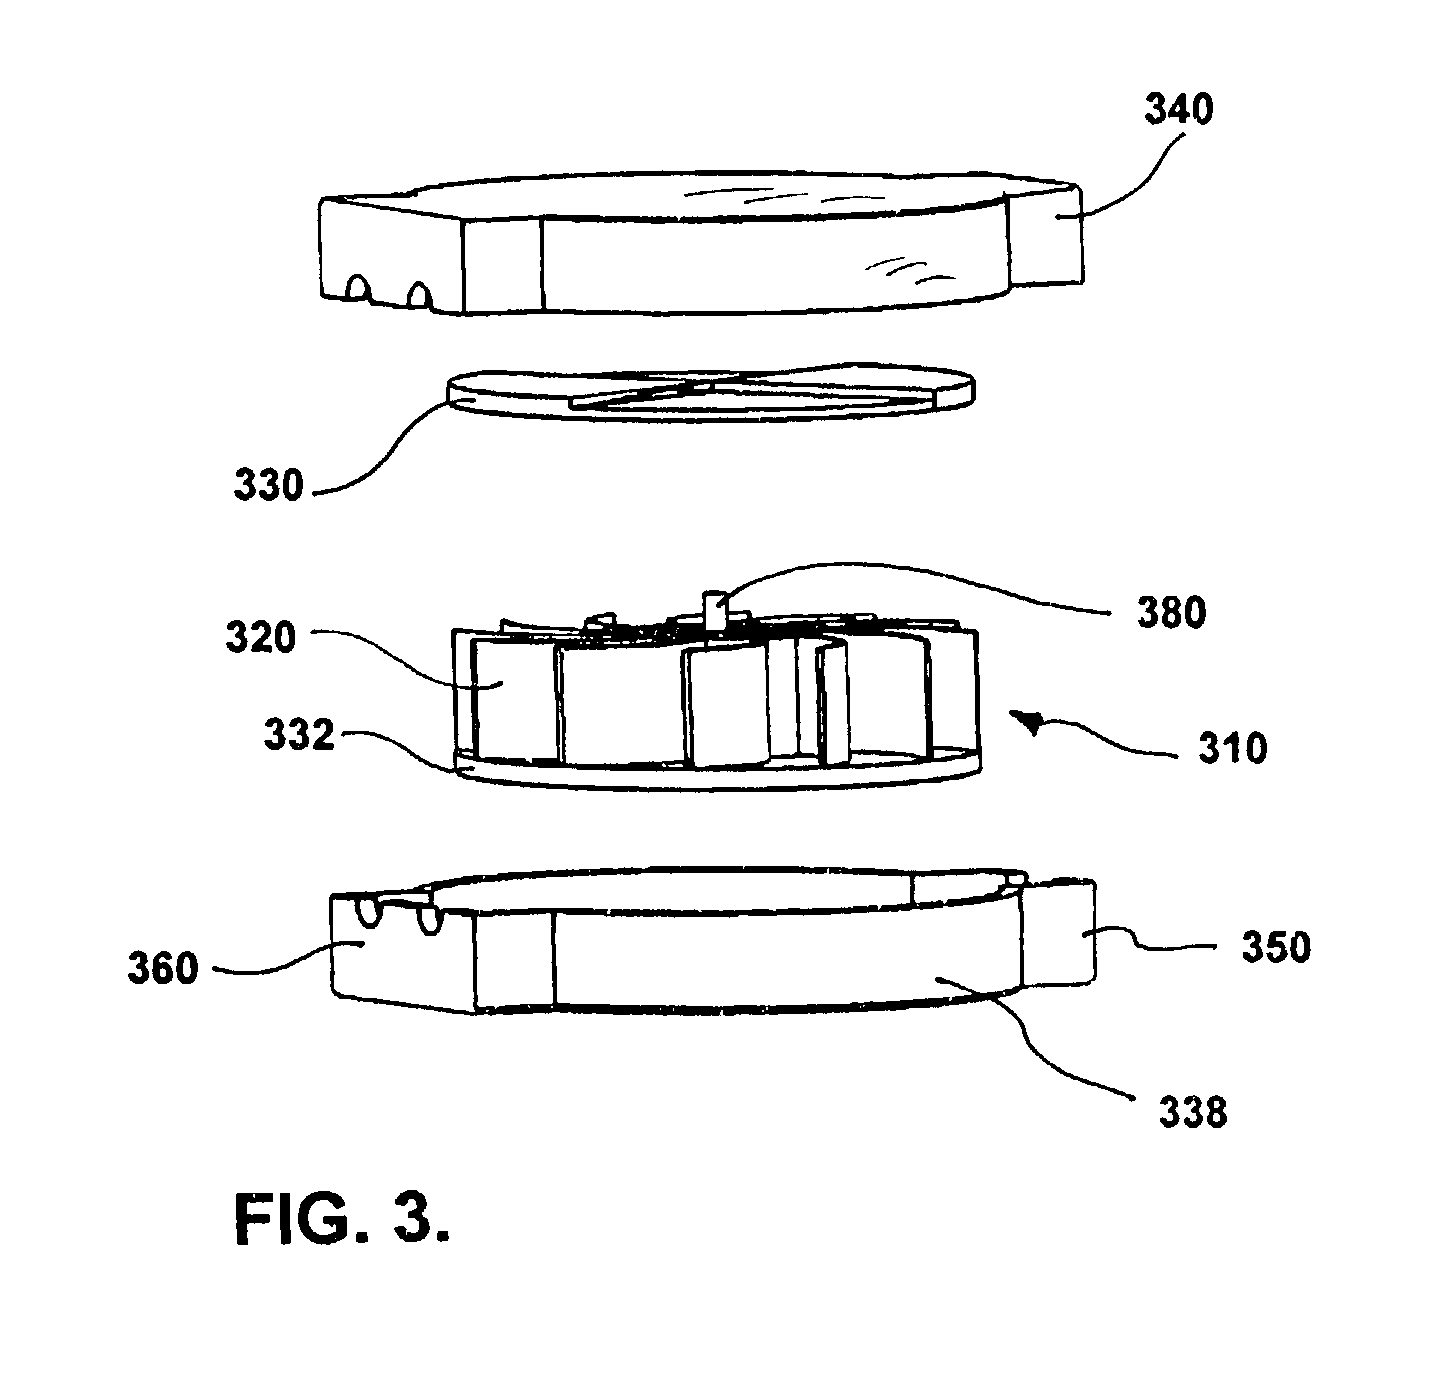 System and method for monitoring the delivery of gas to a person's airway